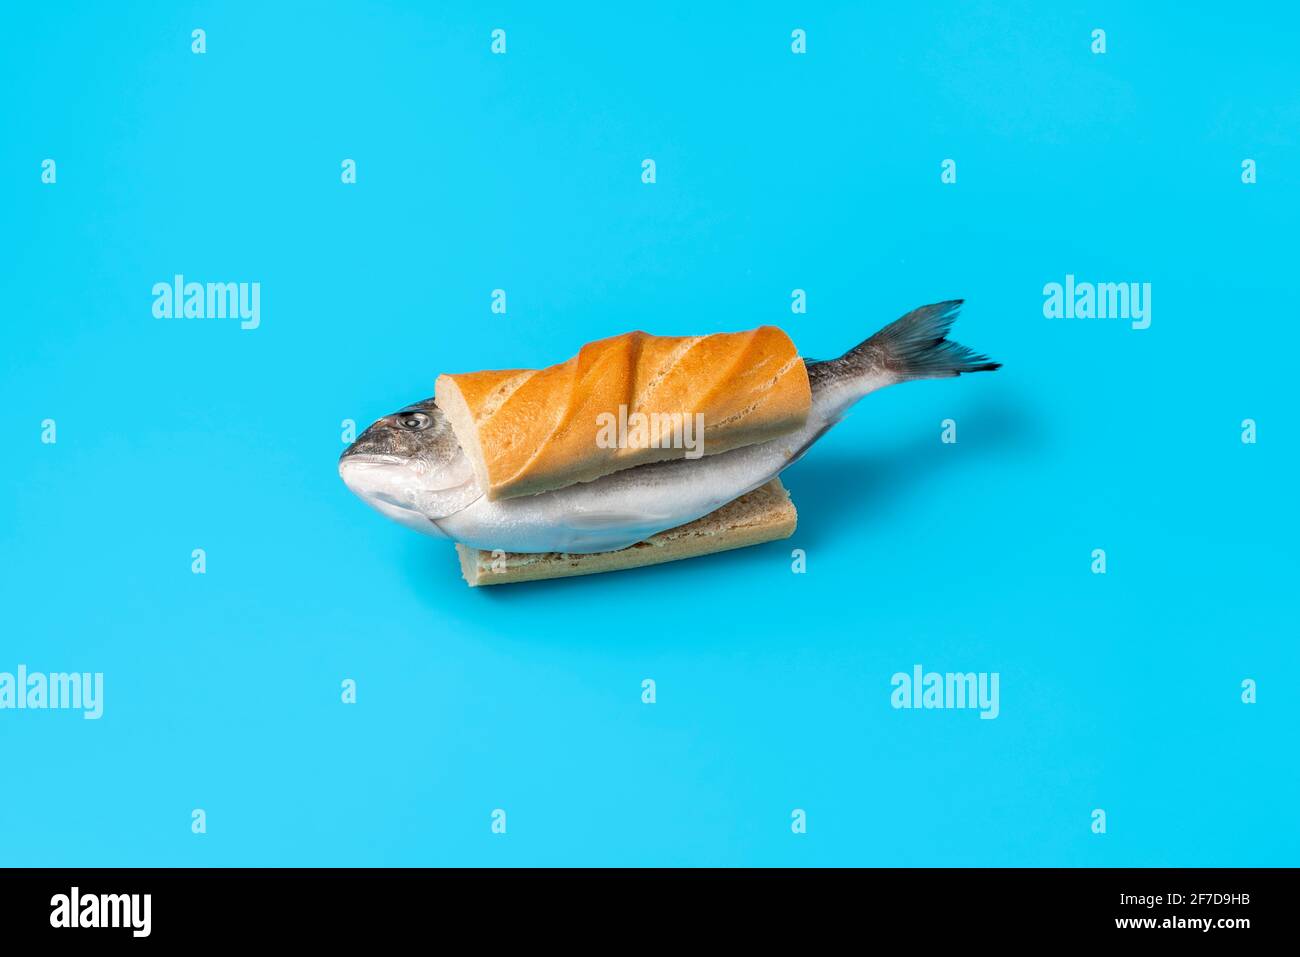 Whole raw fish between slices of bread on a blue colored table. Eating raw  fish concept with a frozen dorado fish in a sandwich Stock Photo - Alamy